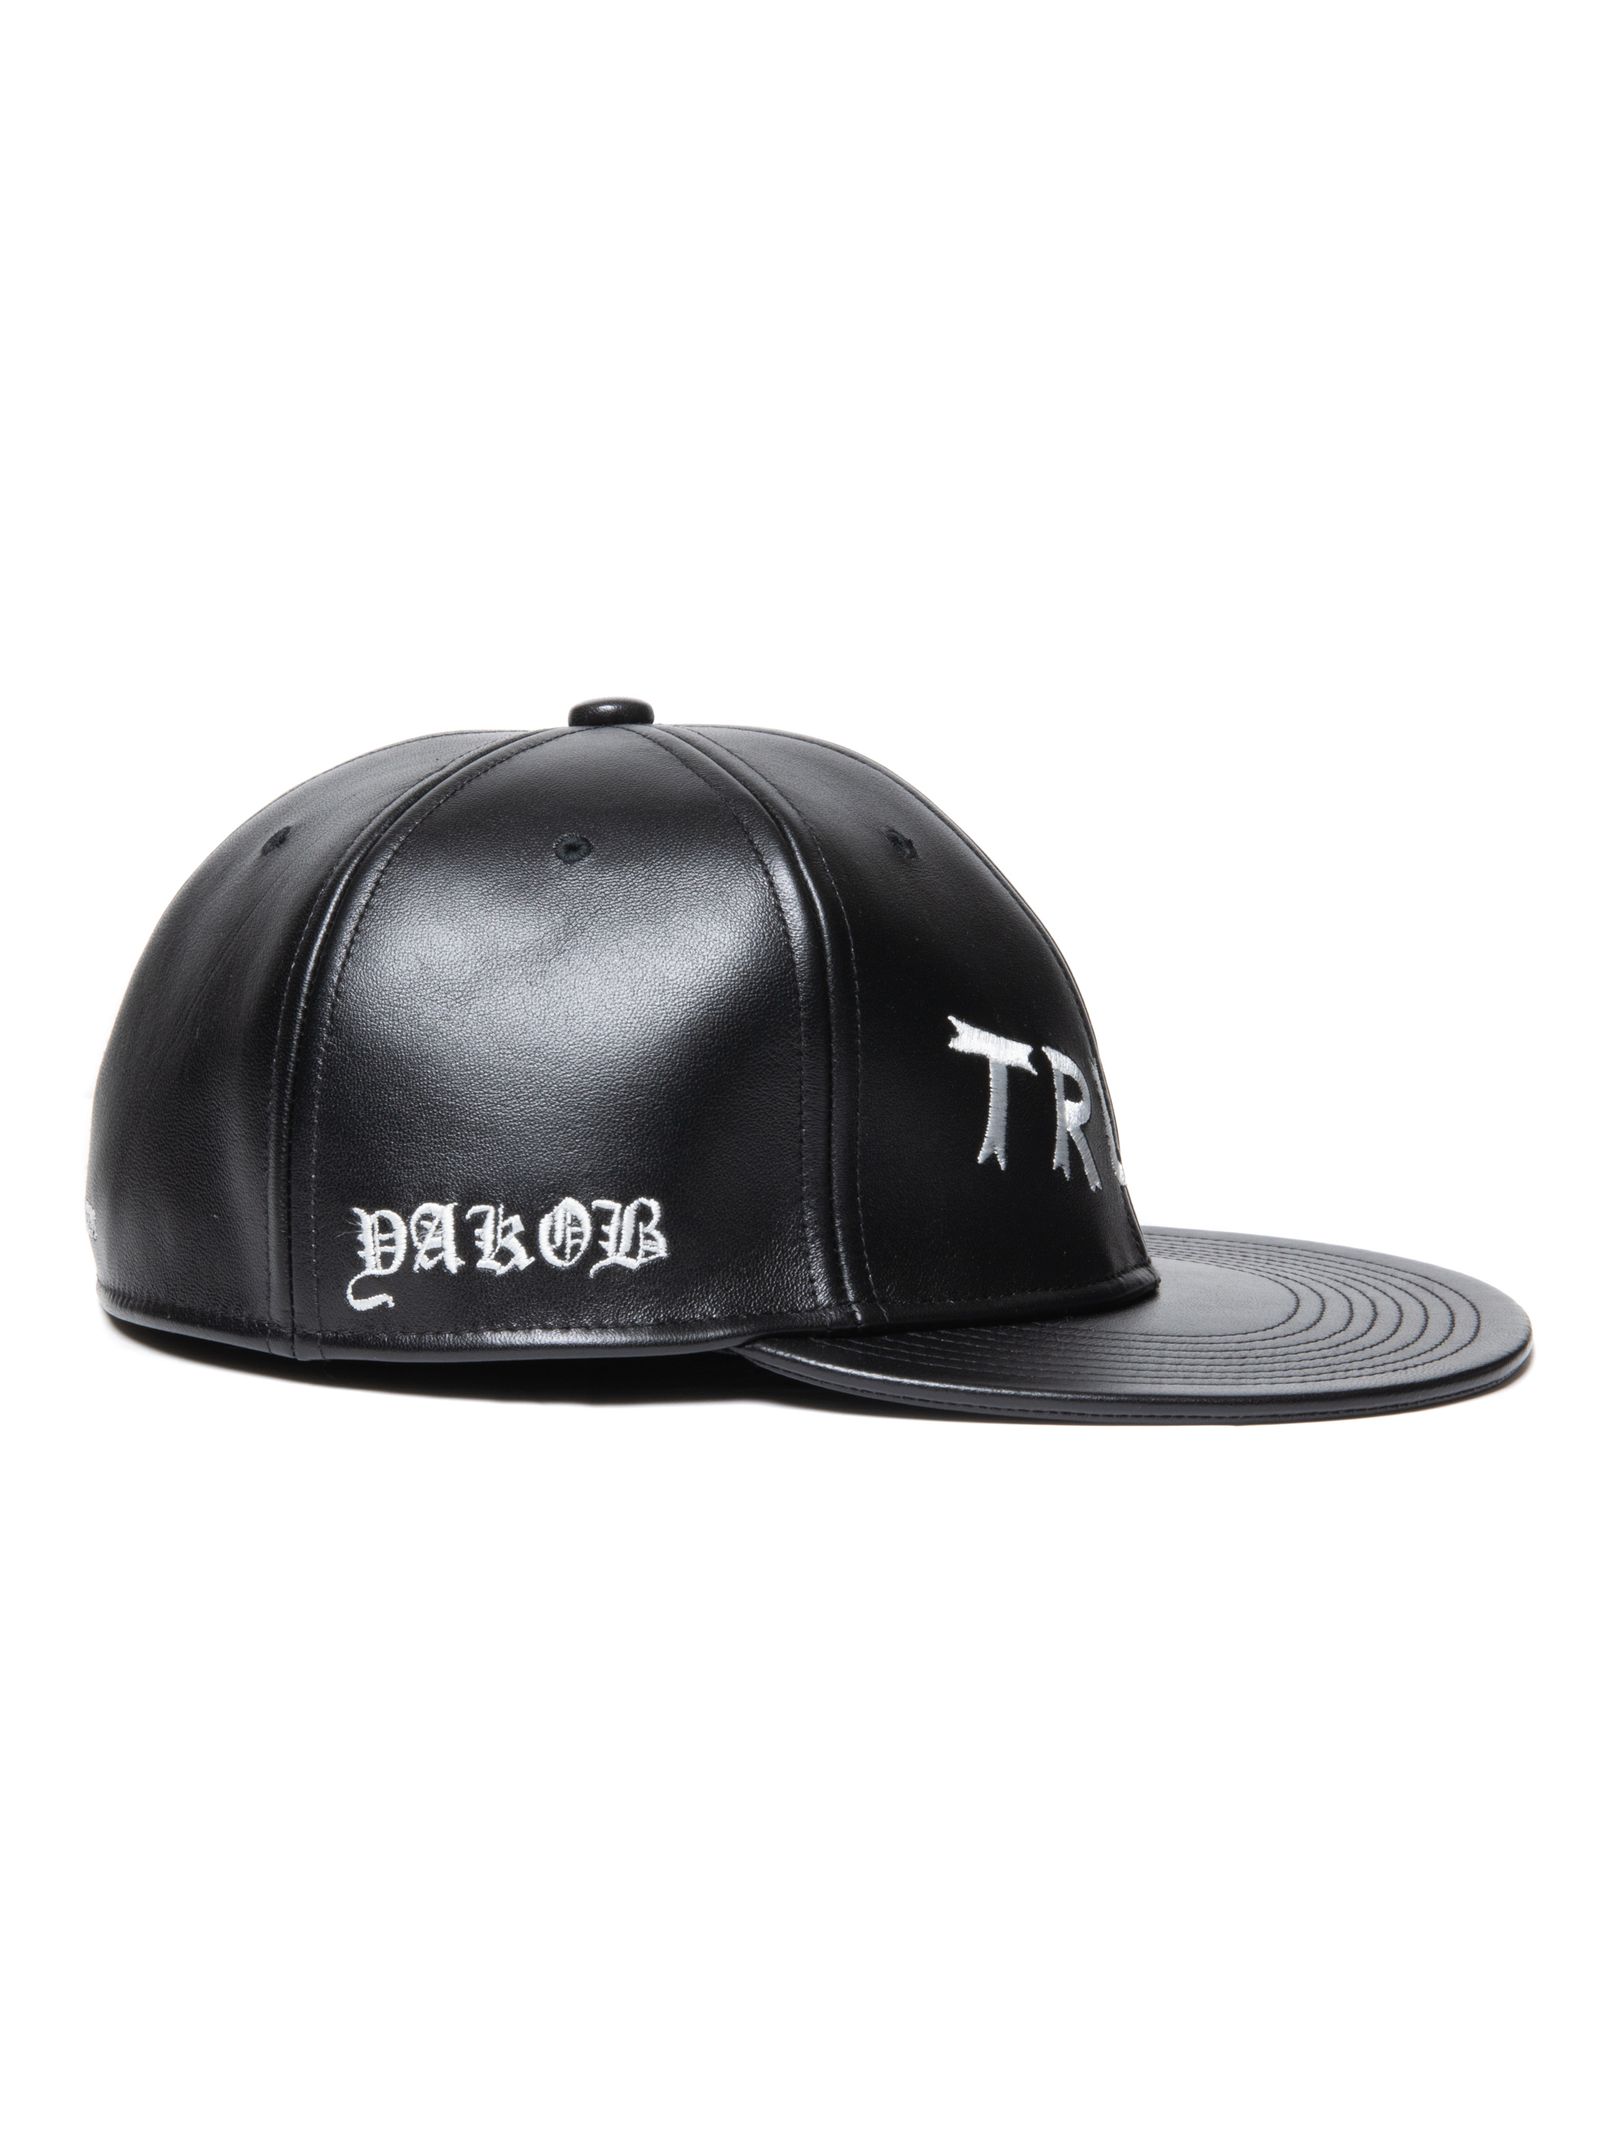 COOTIE PRODUCTIONS - Leather 6 Panel Cap (Jakob Morley